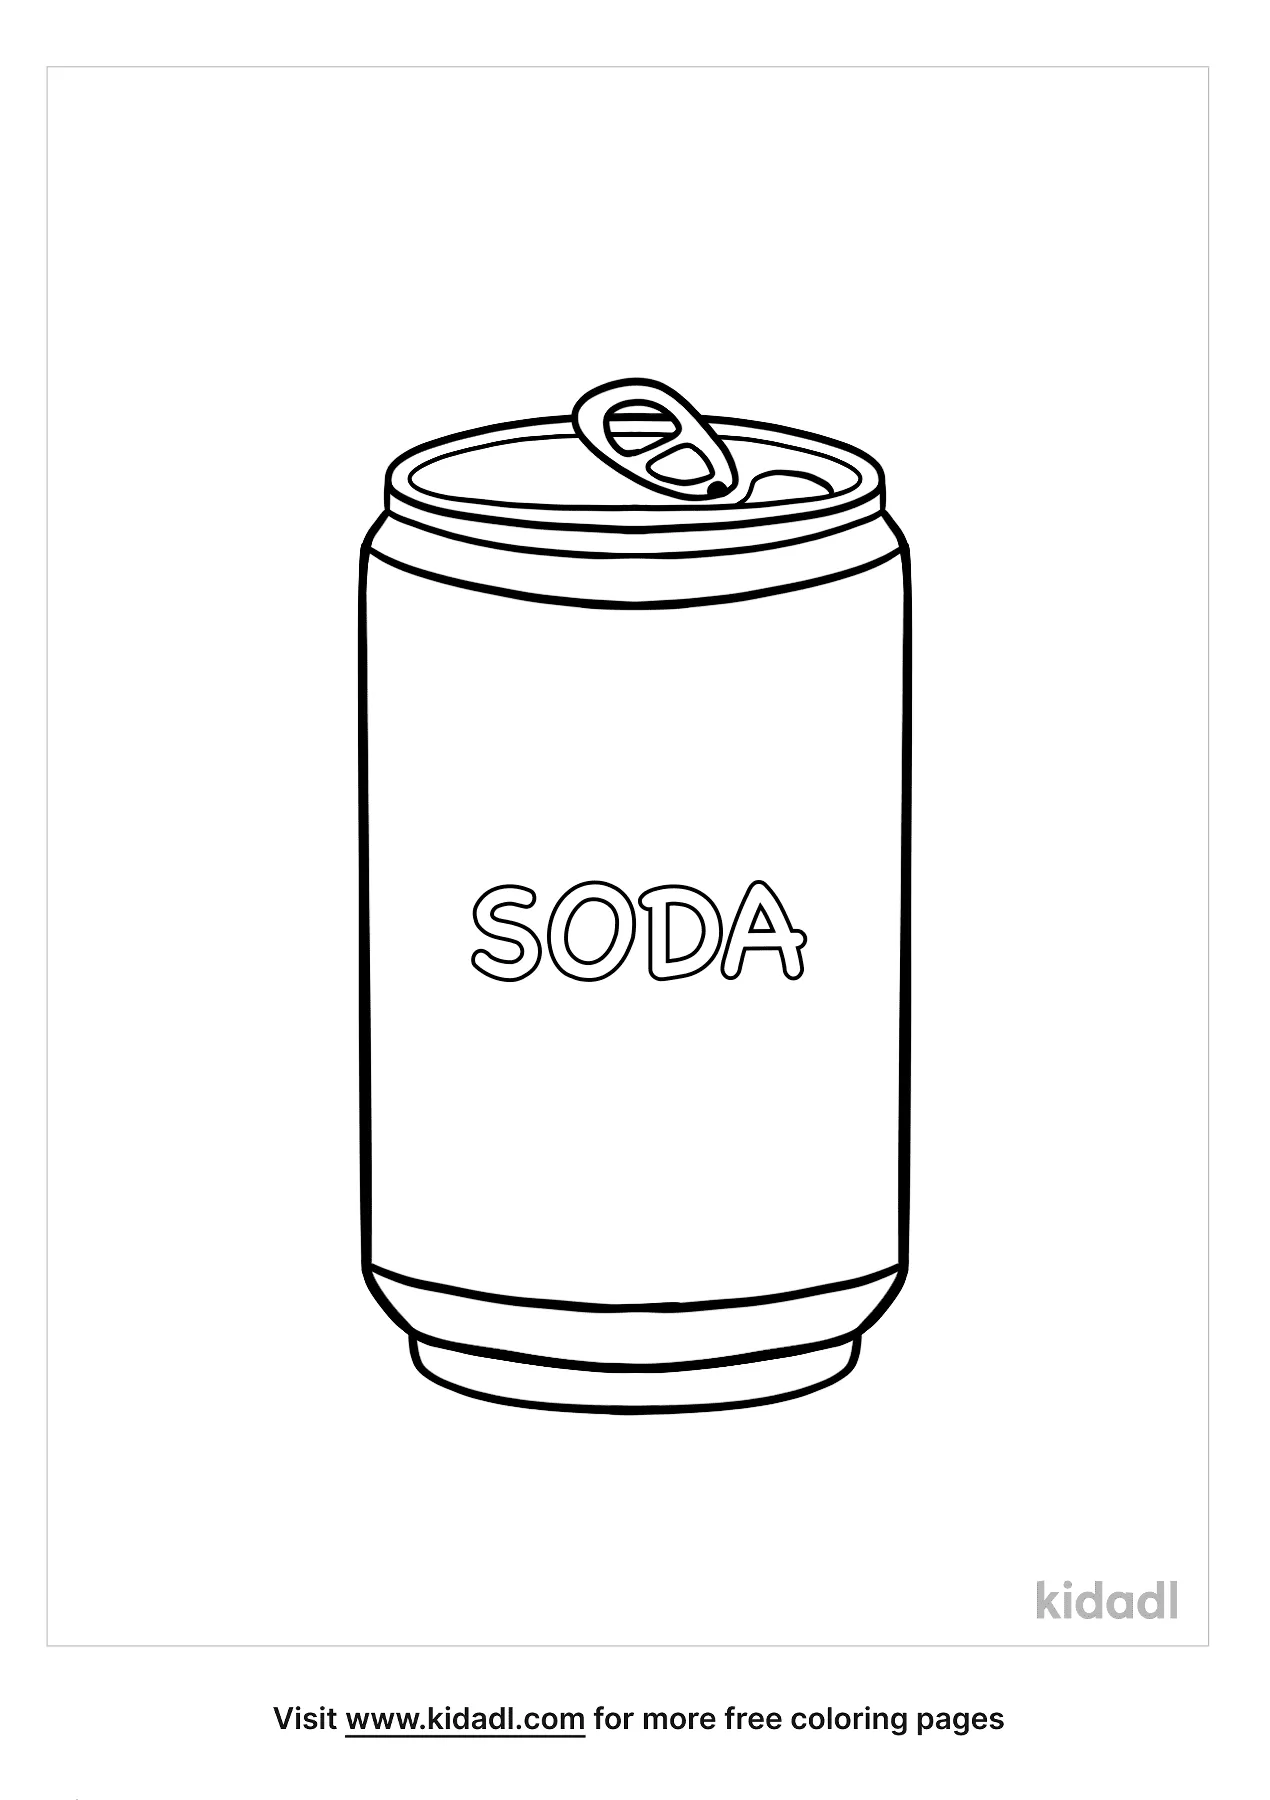 Free soda can coloring page coloring page printables